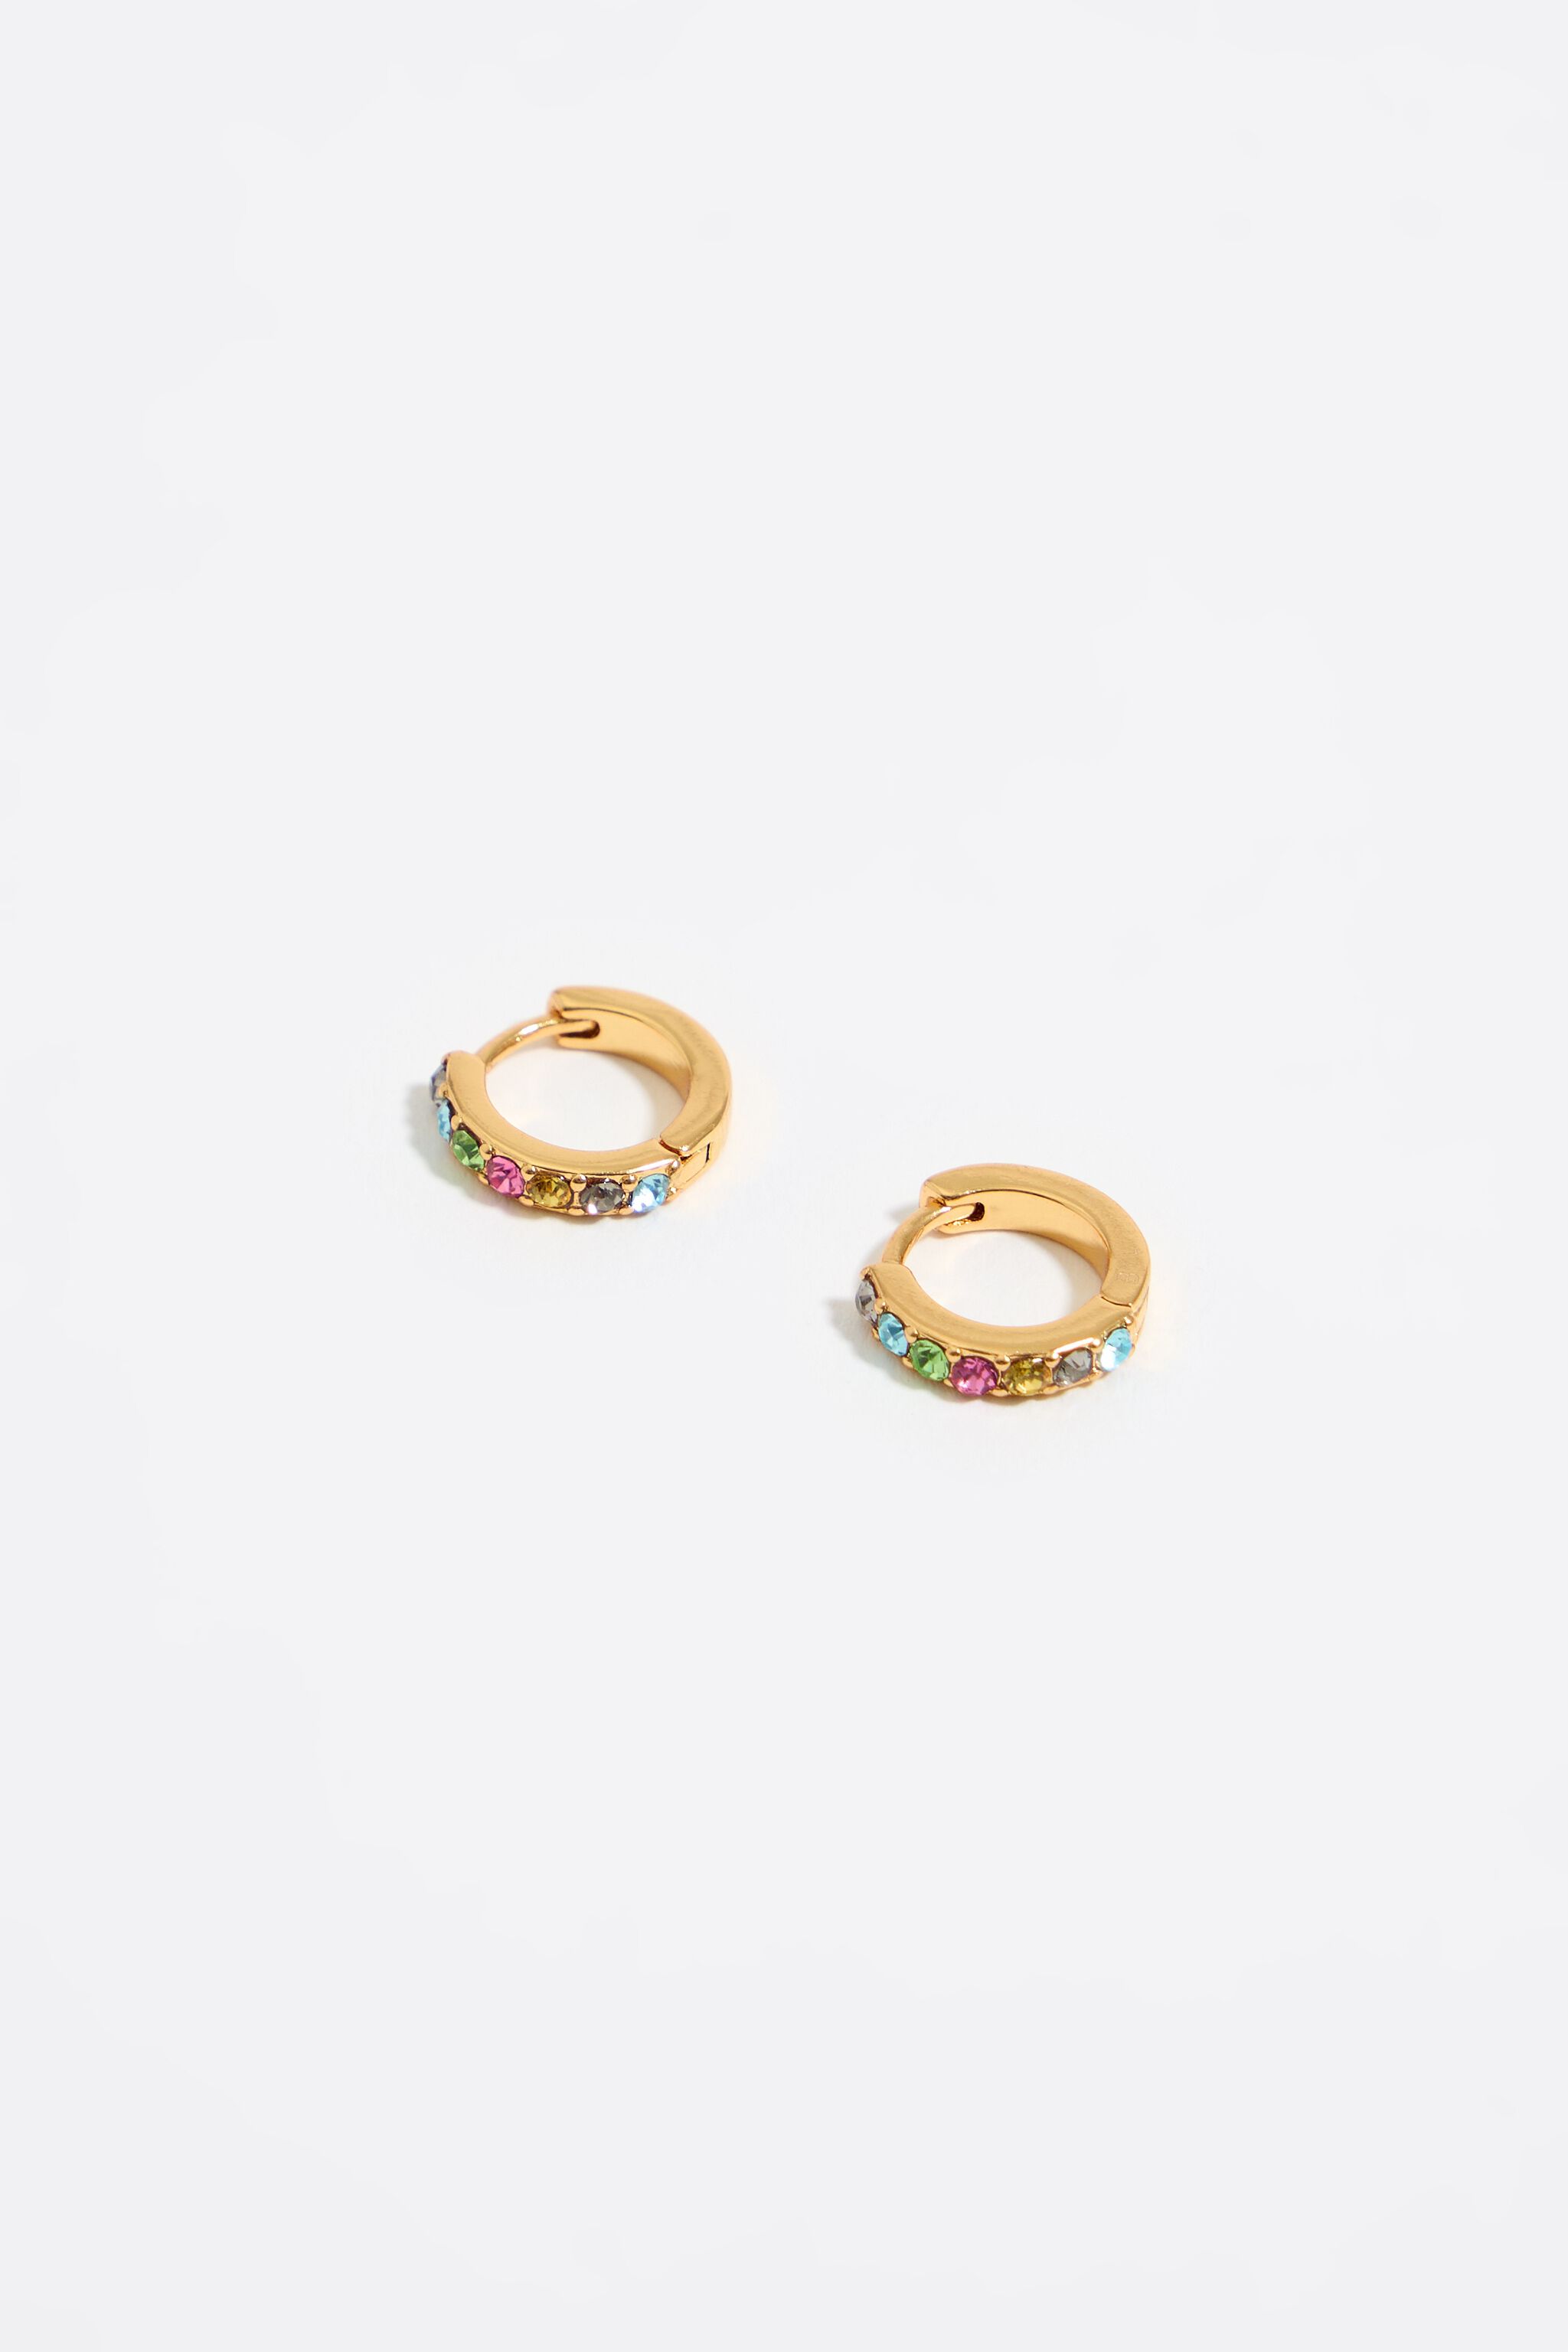 Golden mini hoop earrings with multicolored crystals